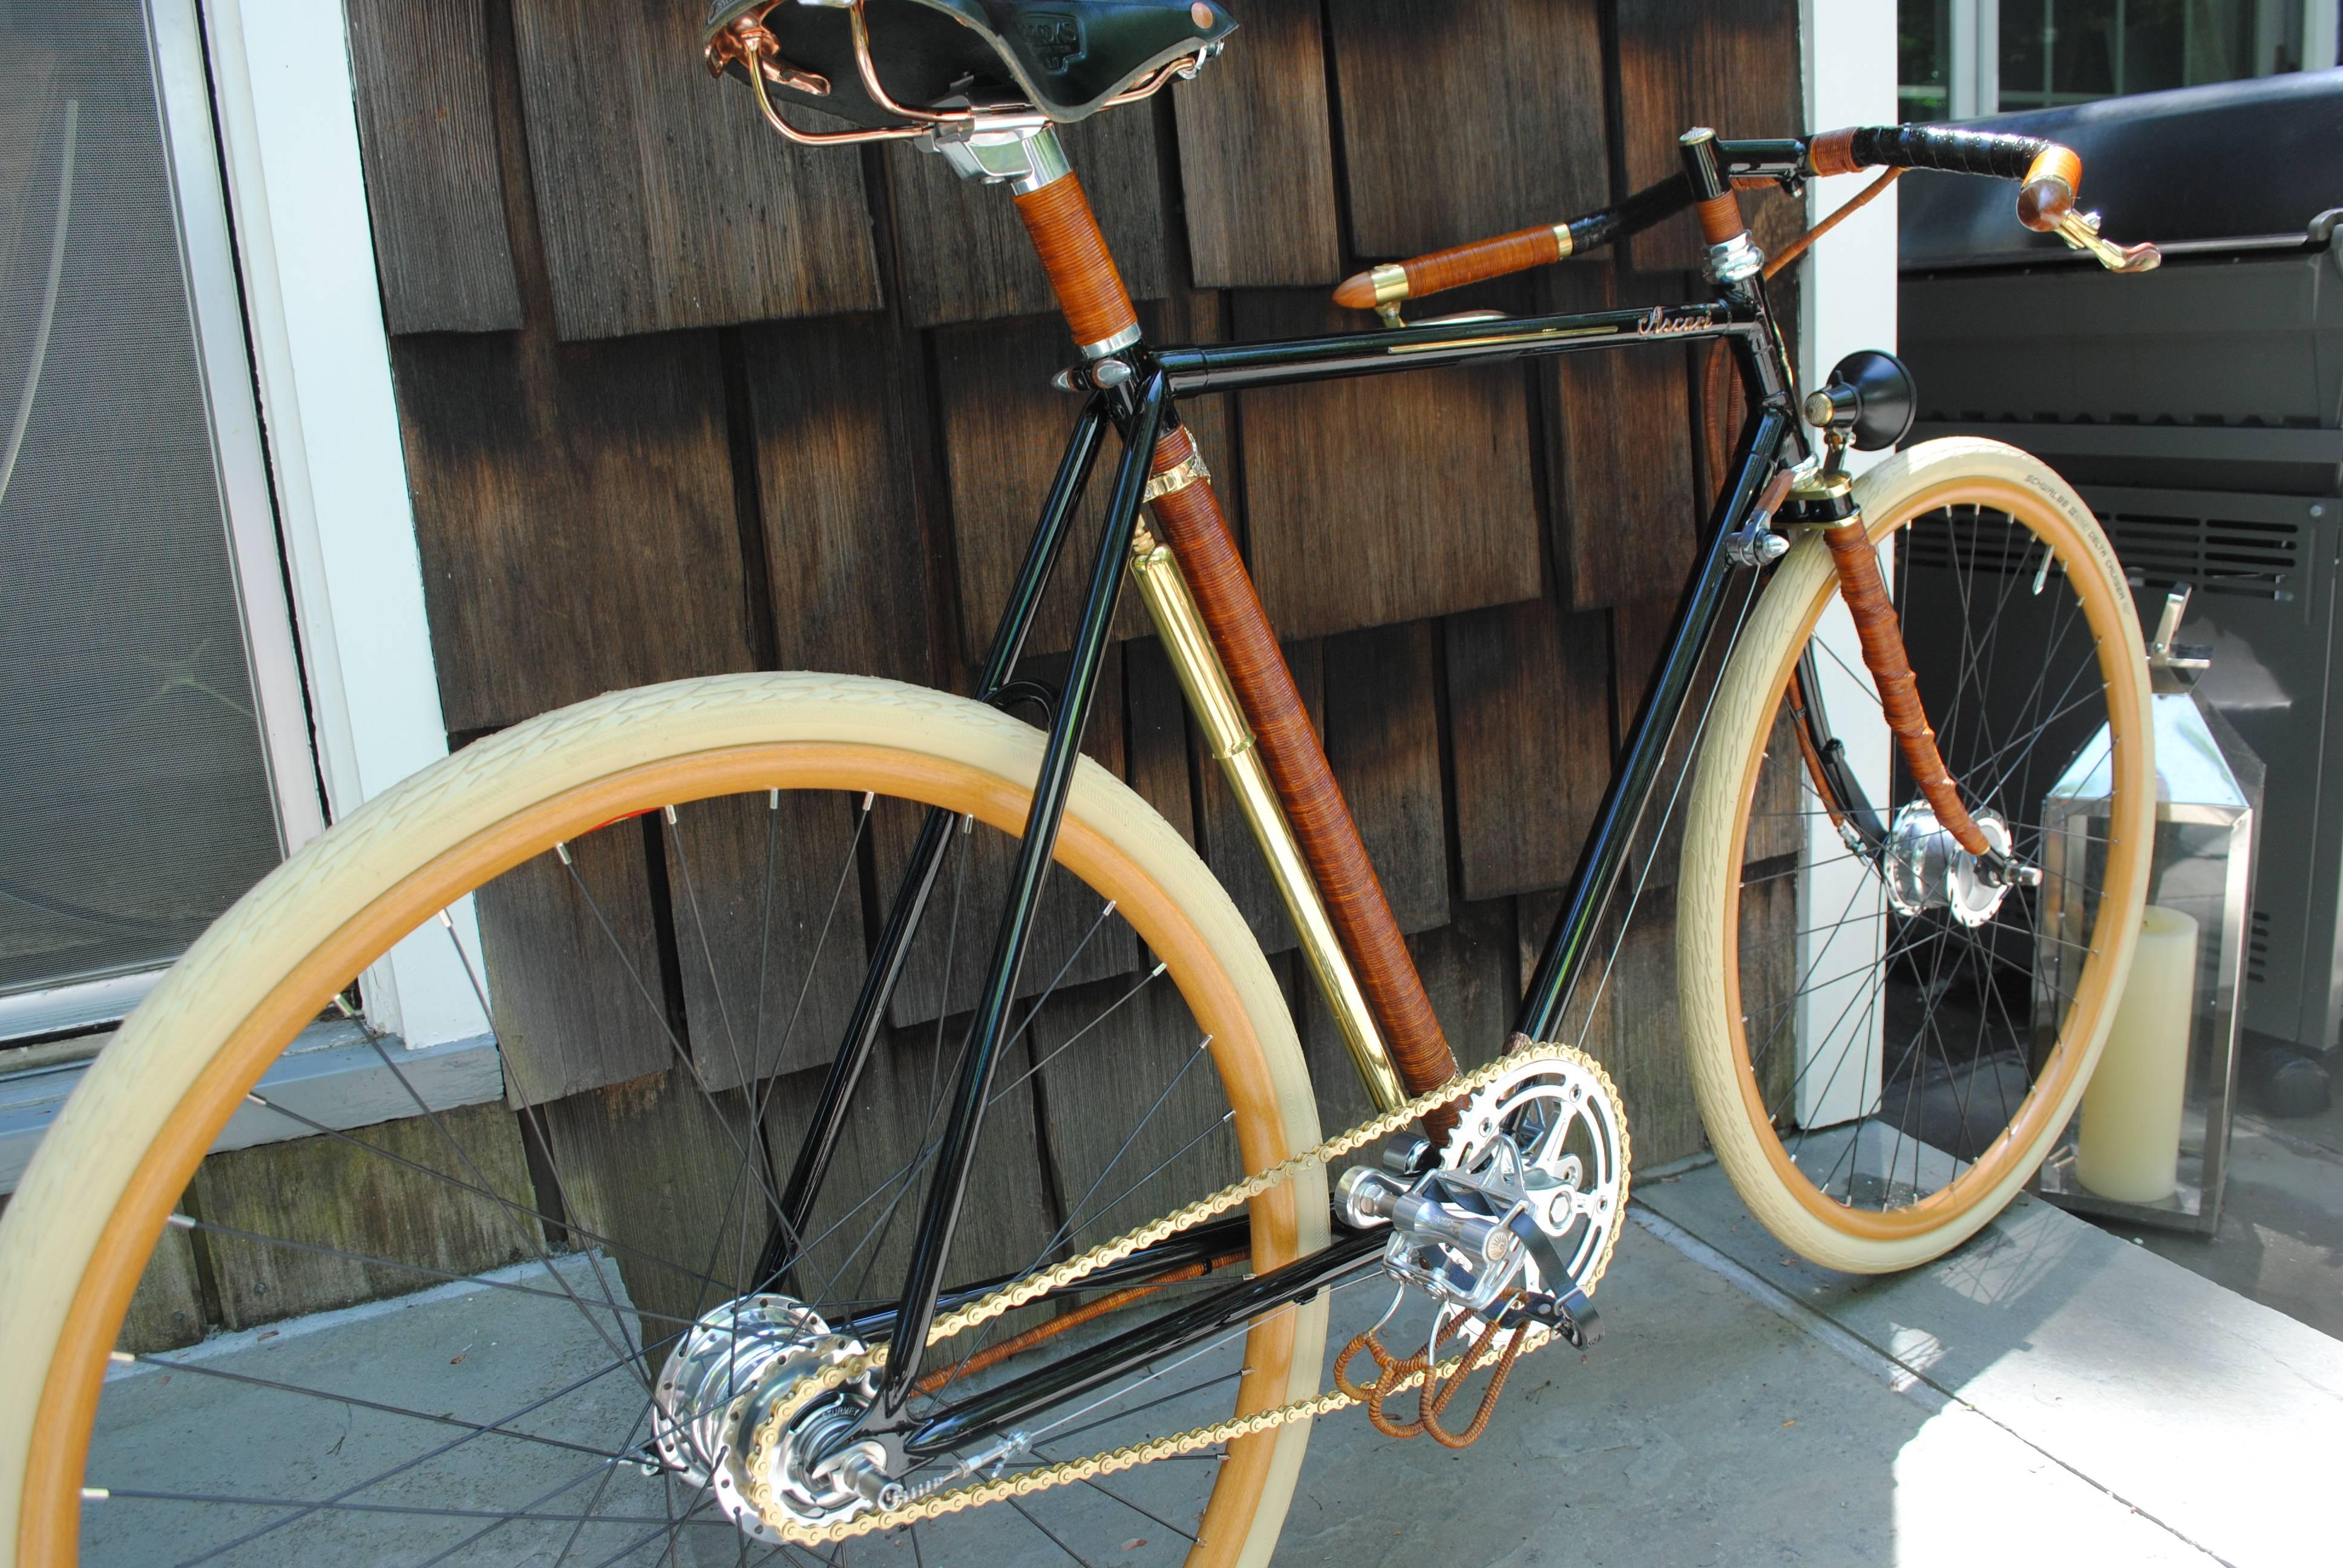 Model: Ascari copper custom.
Date: April 28, 2015.
Serial #: 038.
Brand new condition (never been ridden outdoors, ever).

The frame size is 22.5